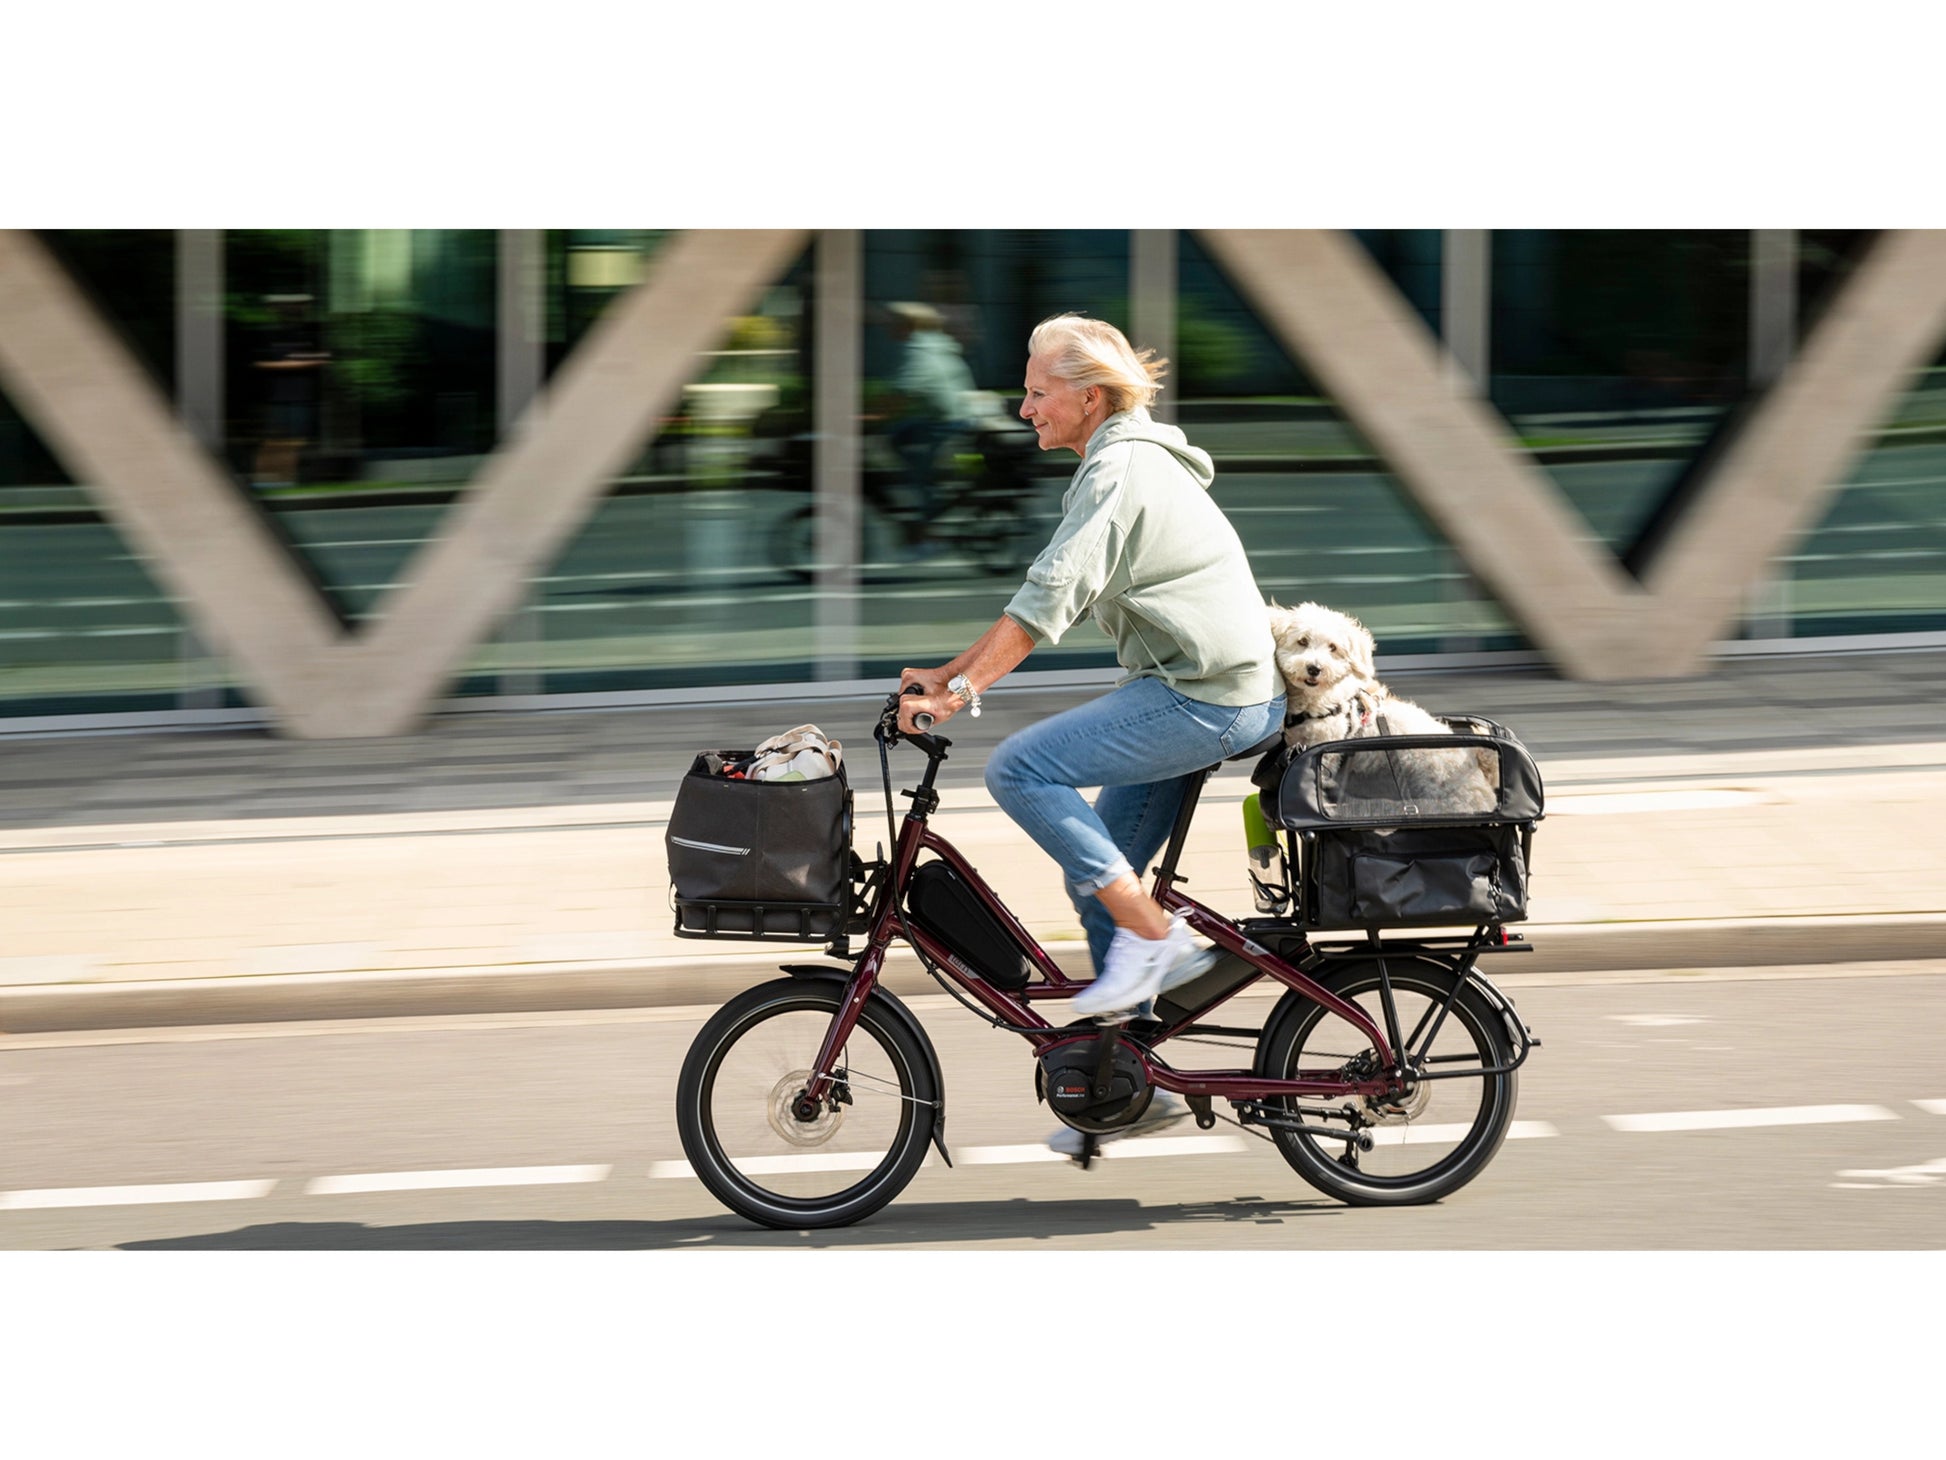 Tern Quick Haul P9 Performance electric cargo bike woman and dog riding on city street